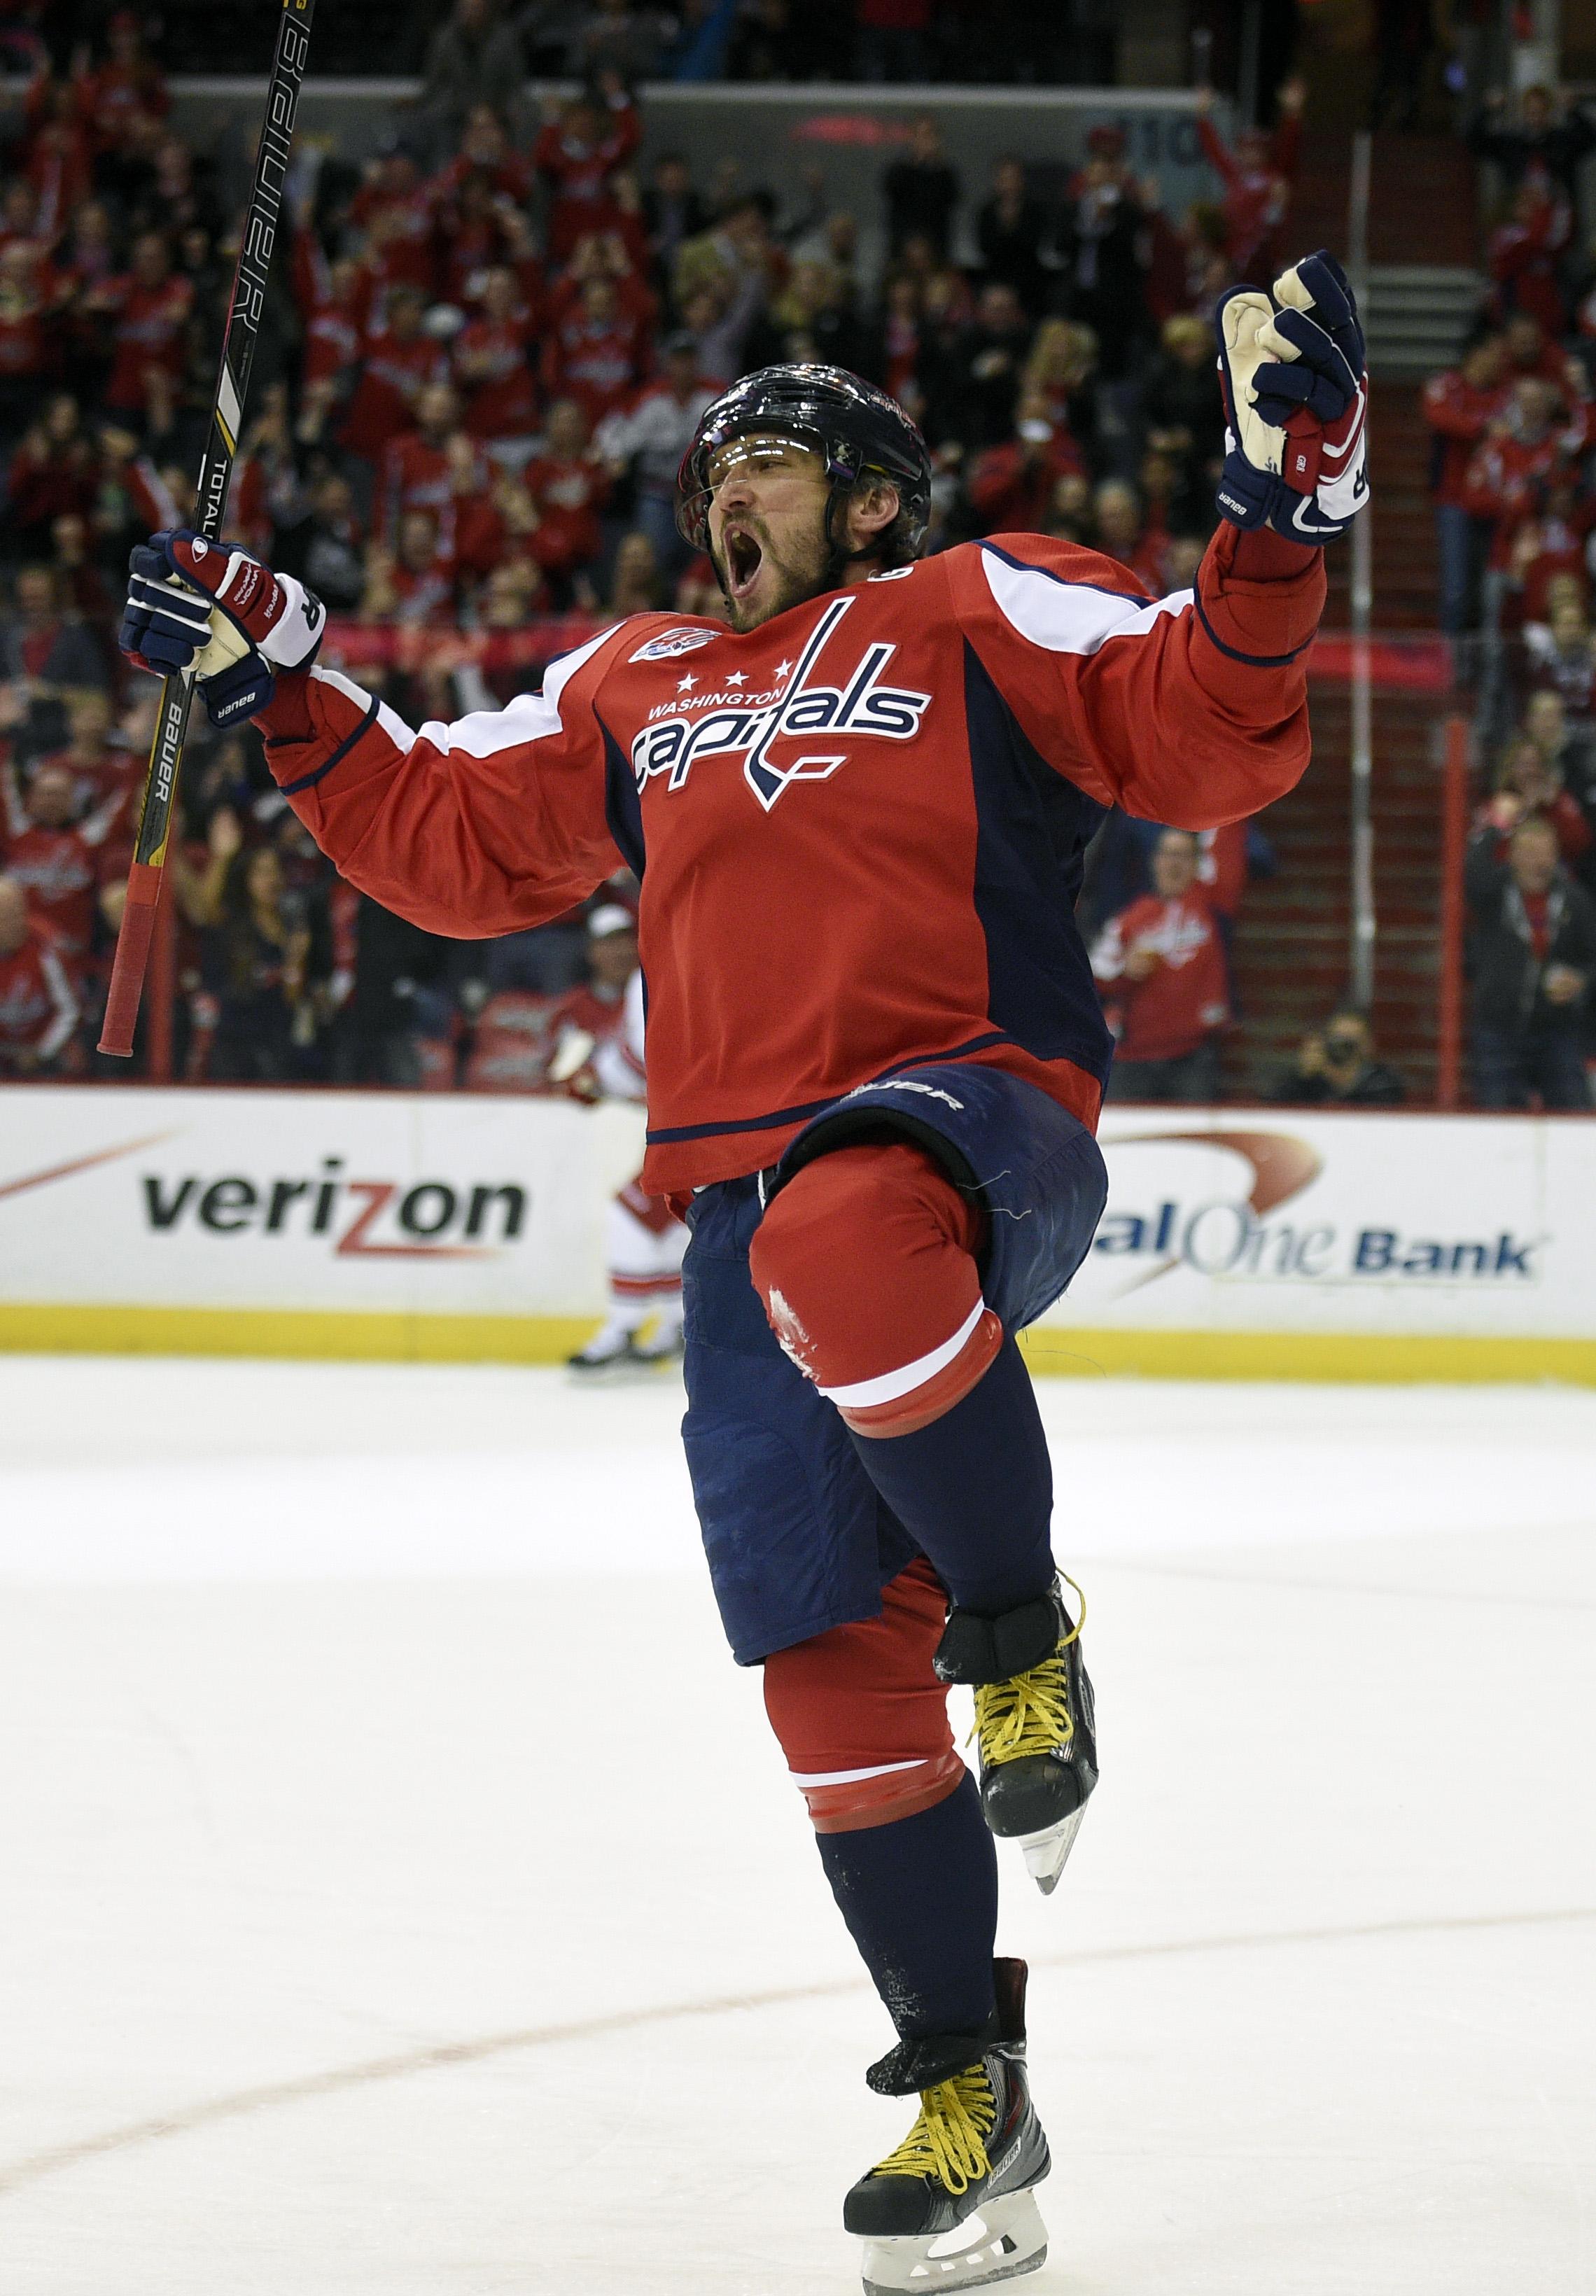 Alex Ovechkin Scores 50th Goal Of The Season; Ties Wayne Gretzky and Mike  Bossy For Most Seasons With 50 or More Goals